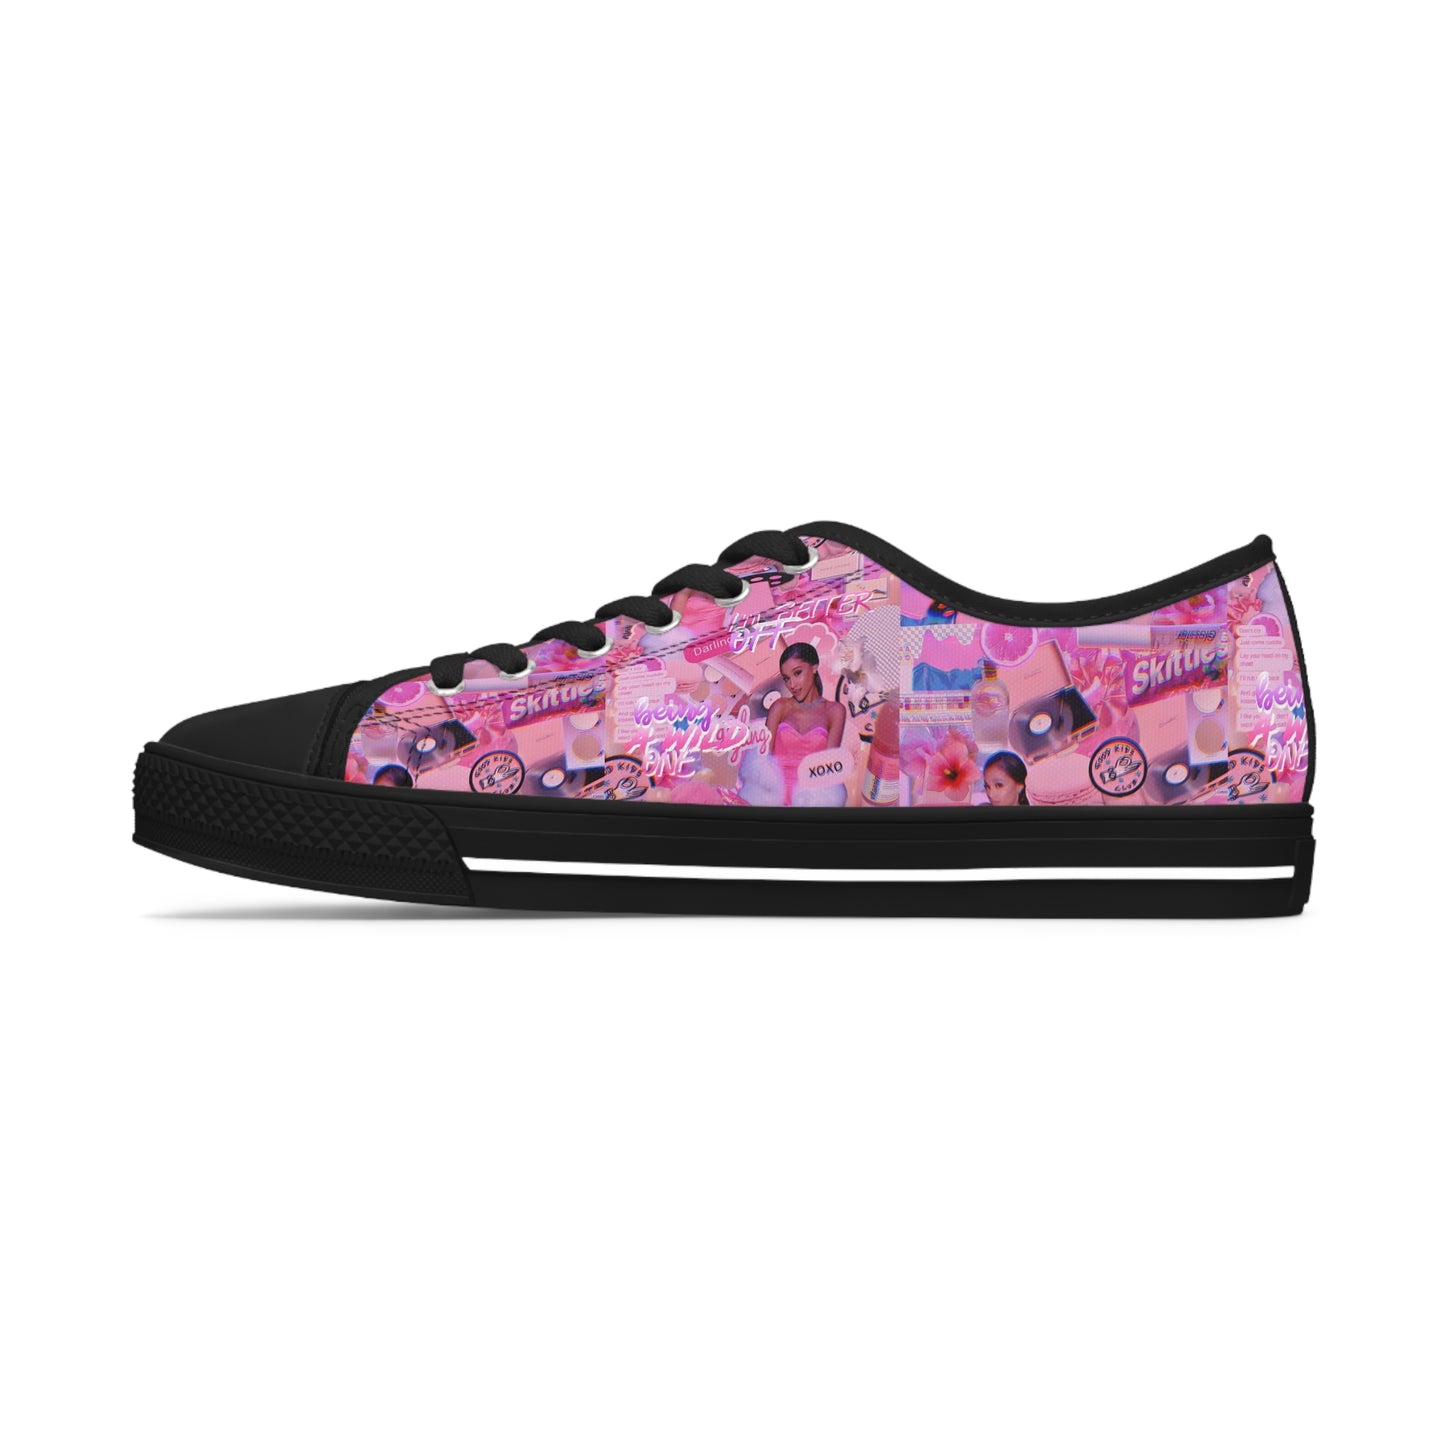 Ariana Grande Purple Vibes Collage Women's Low Top Sneakers